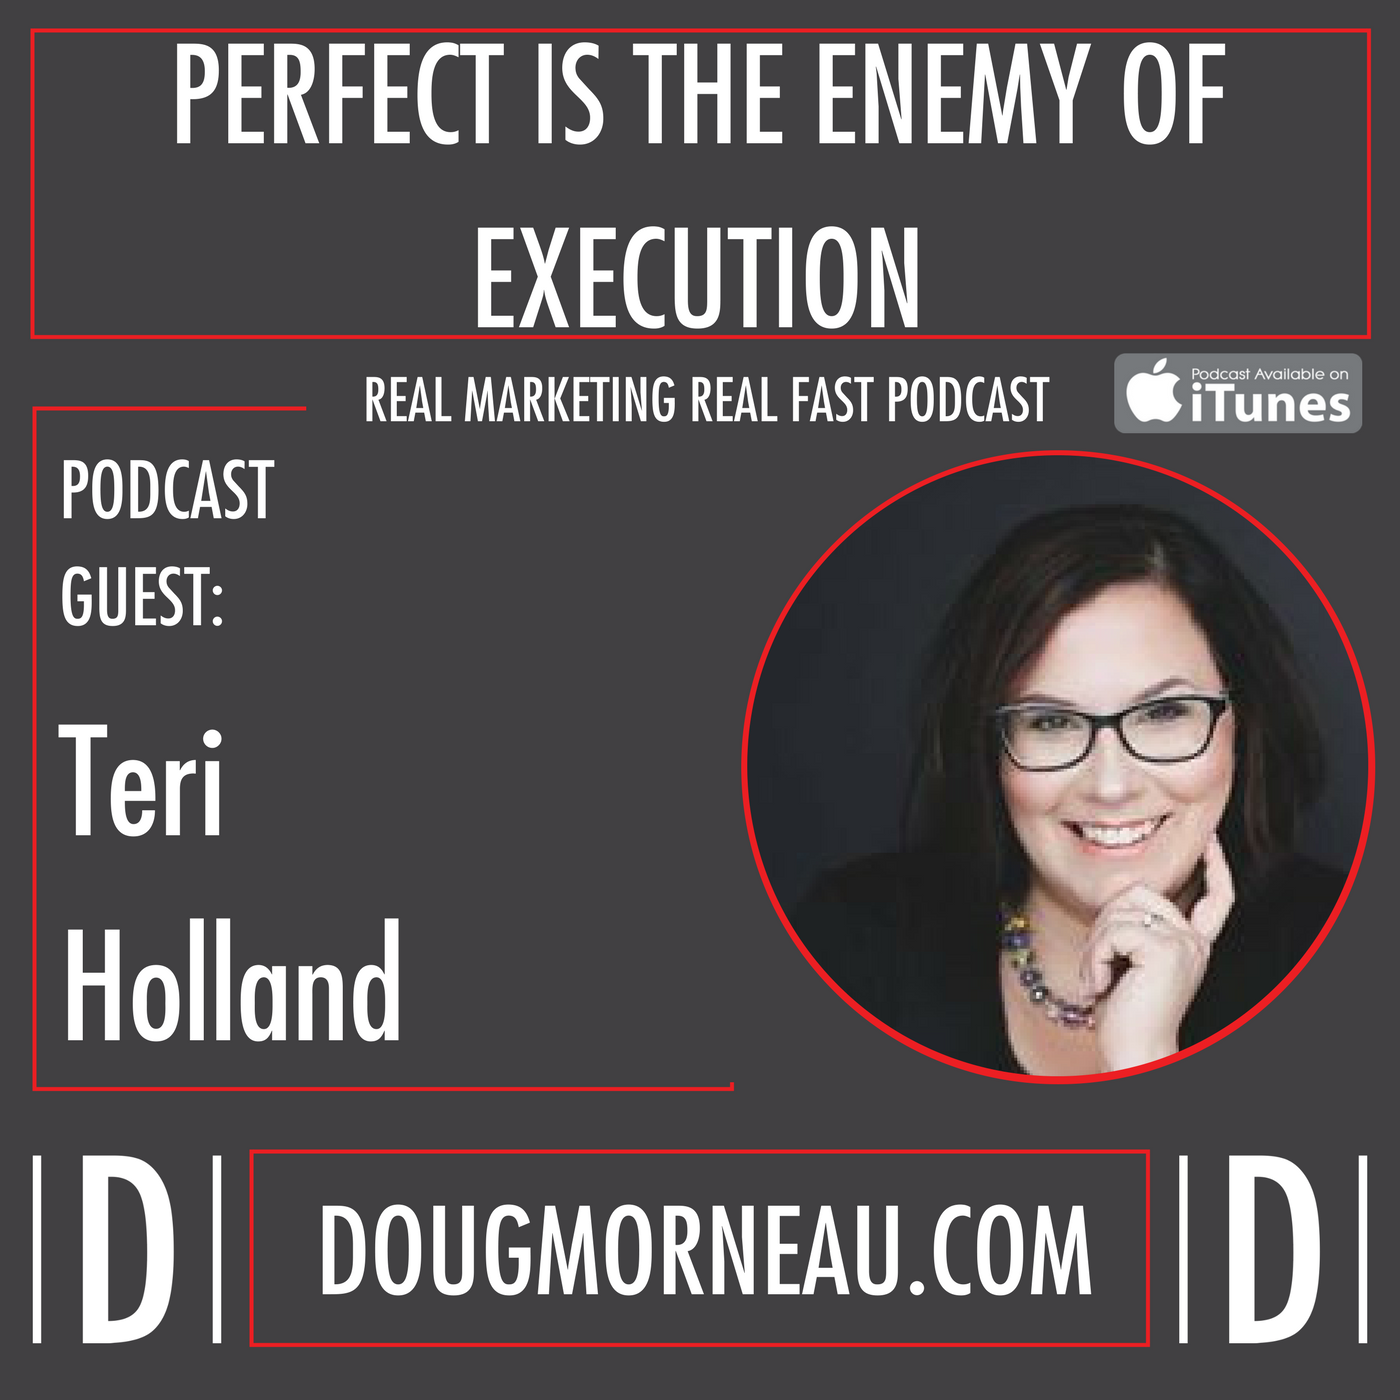 - In NLP there is no failure, there is only feedback- DOUG MORNEAU - TERI HOLLAND - REAL MARKETING REAL FAST PODCAST